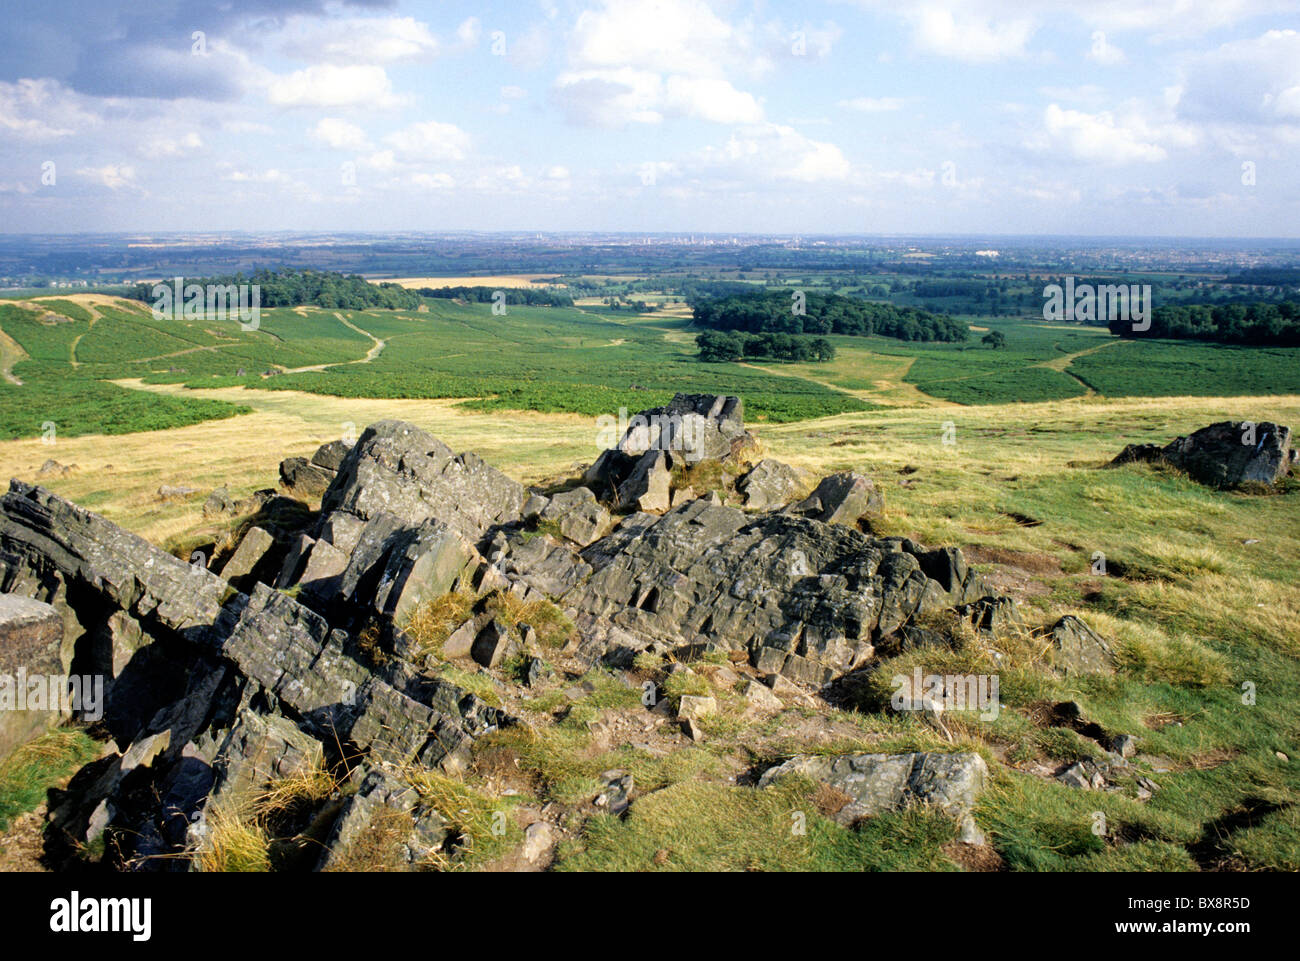 Bradgate Park, Charnwood Forest, view to city of Leicester, England UK Stock Photo